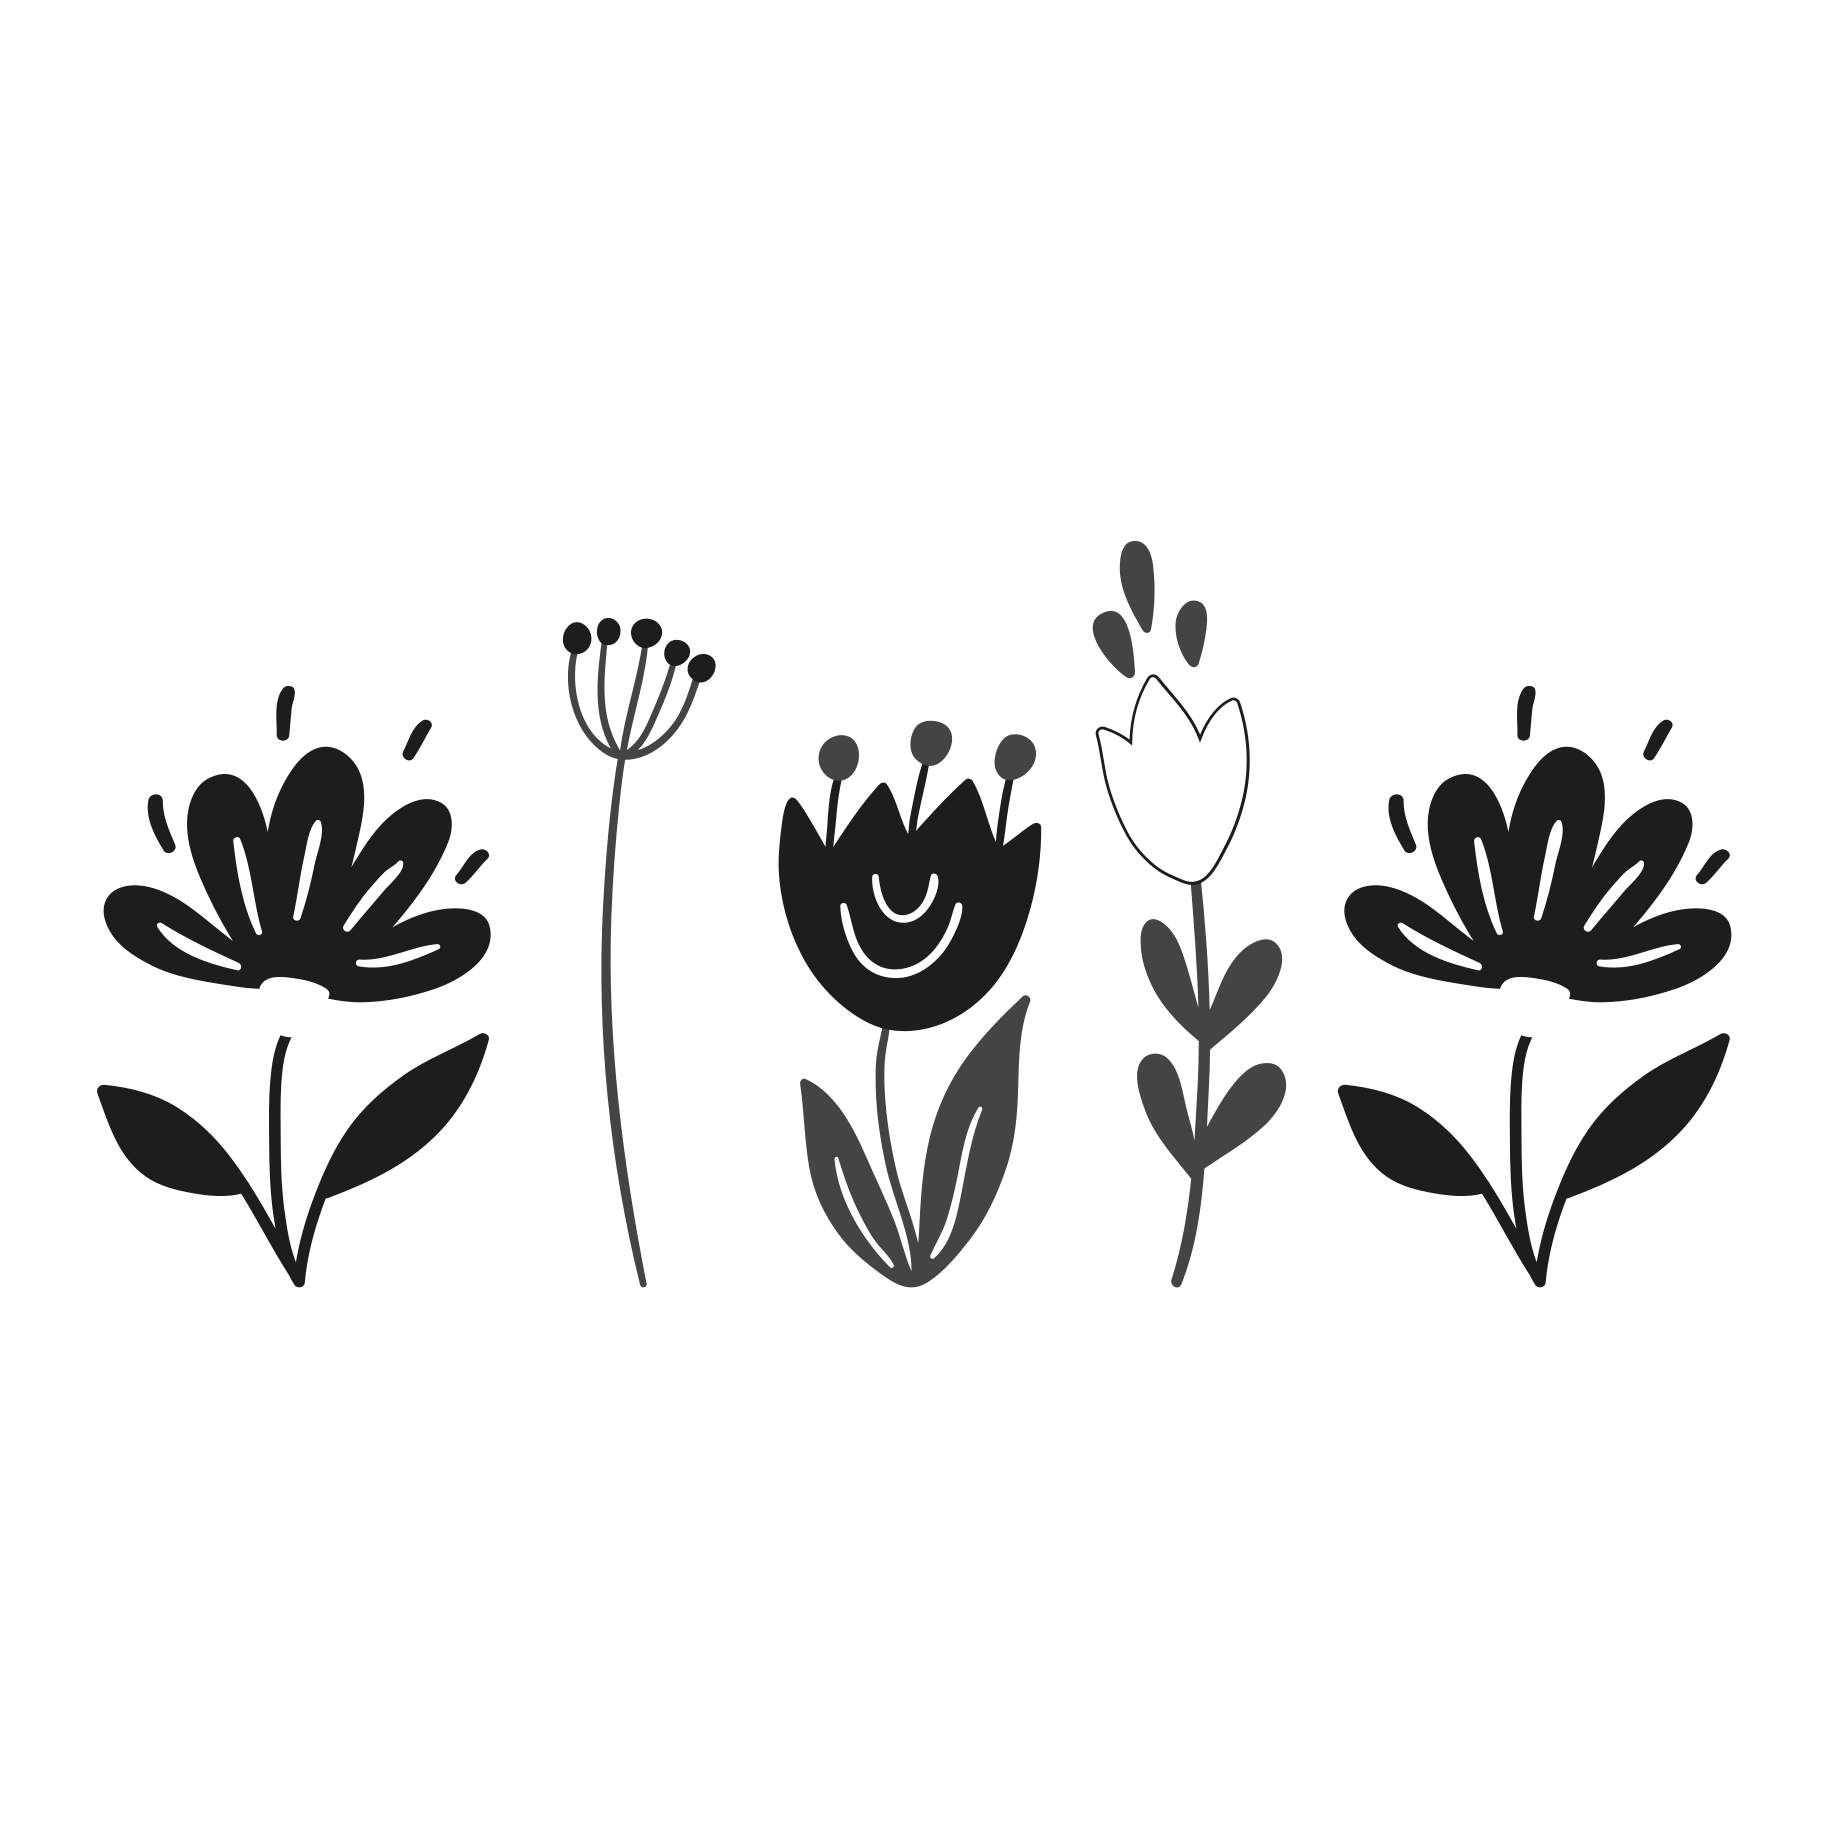 pin-by-asma-jameel-on-research-in-2021-black-and-white-flowers